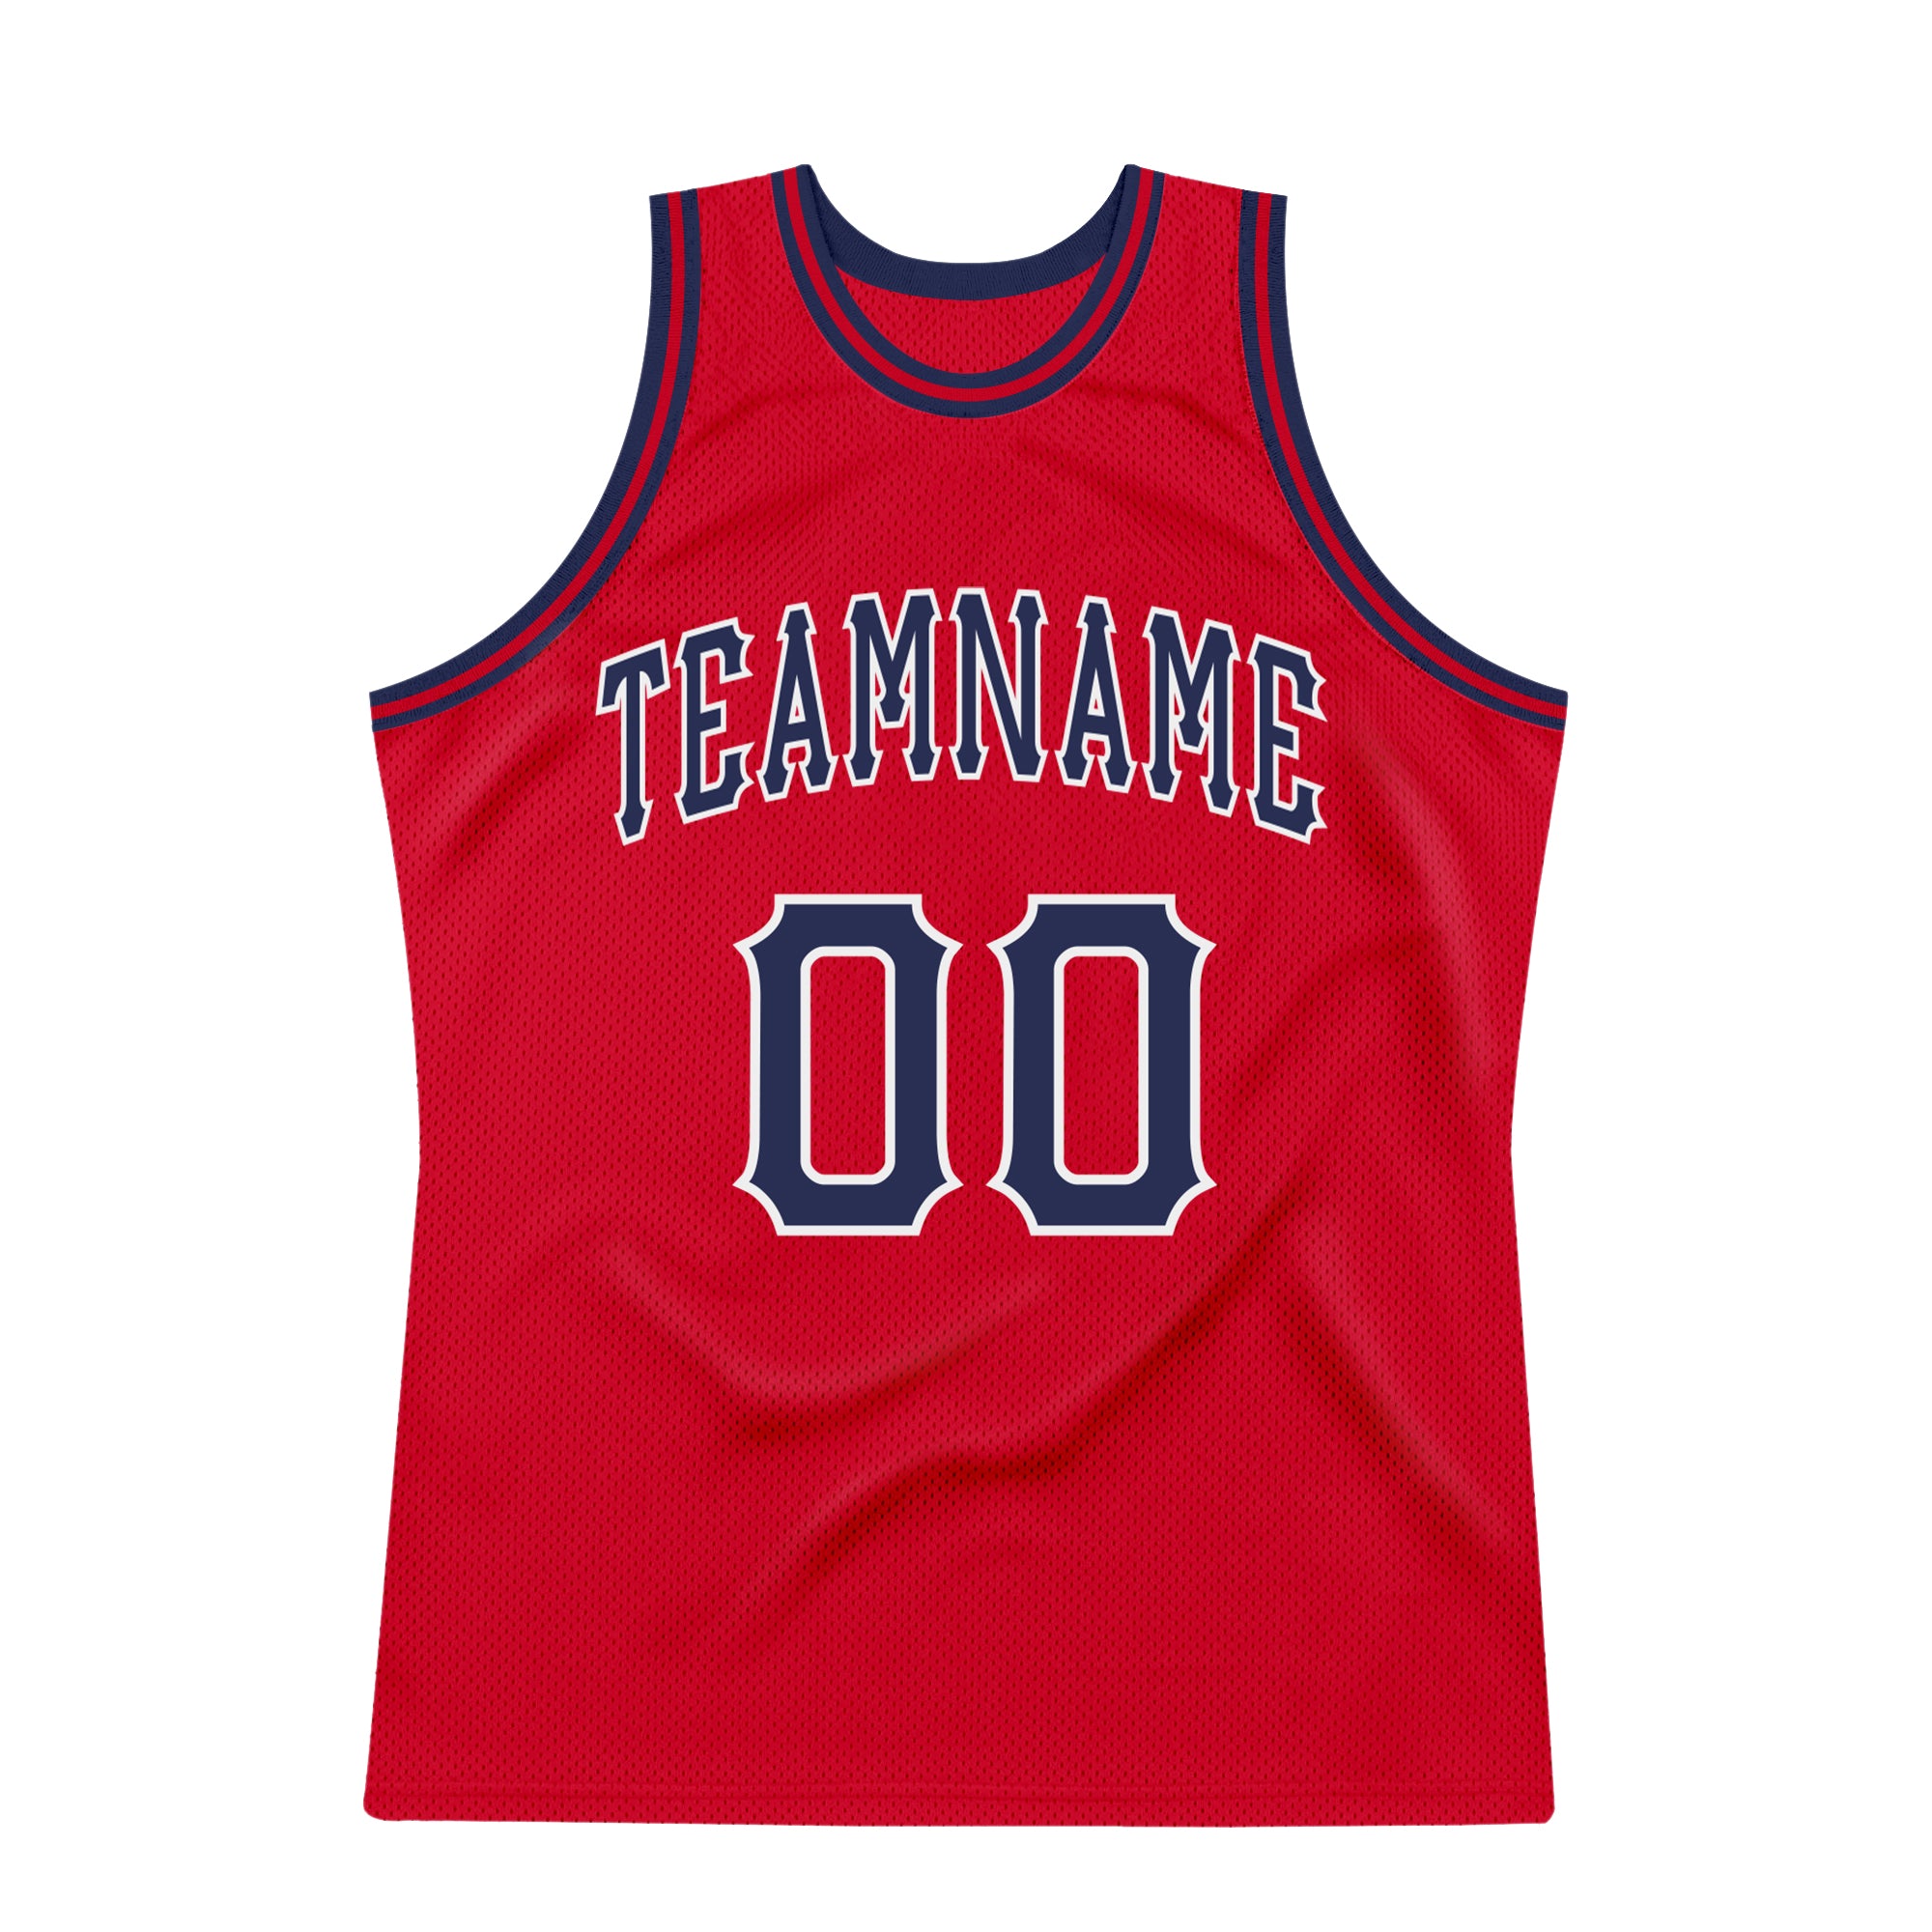 Custom Team White Basketball Authentic Red Throwback Jersey Navy